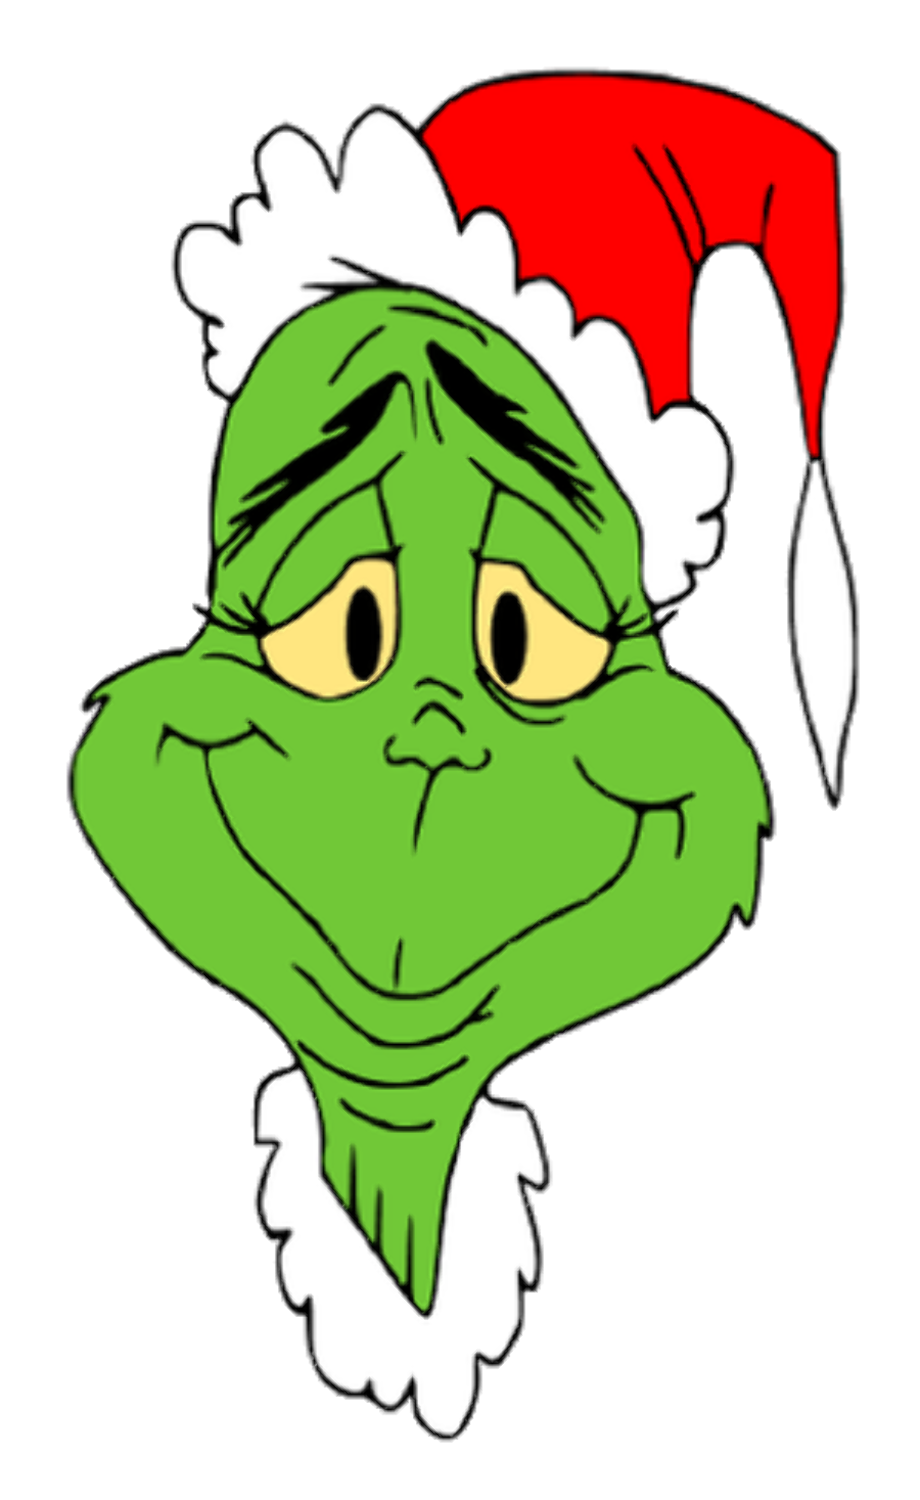 Free Printable Grinch Images